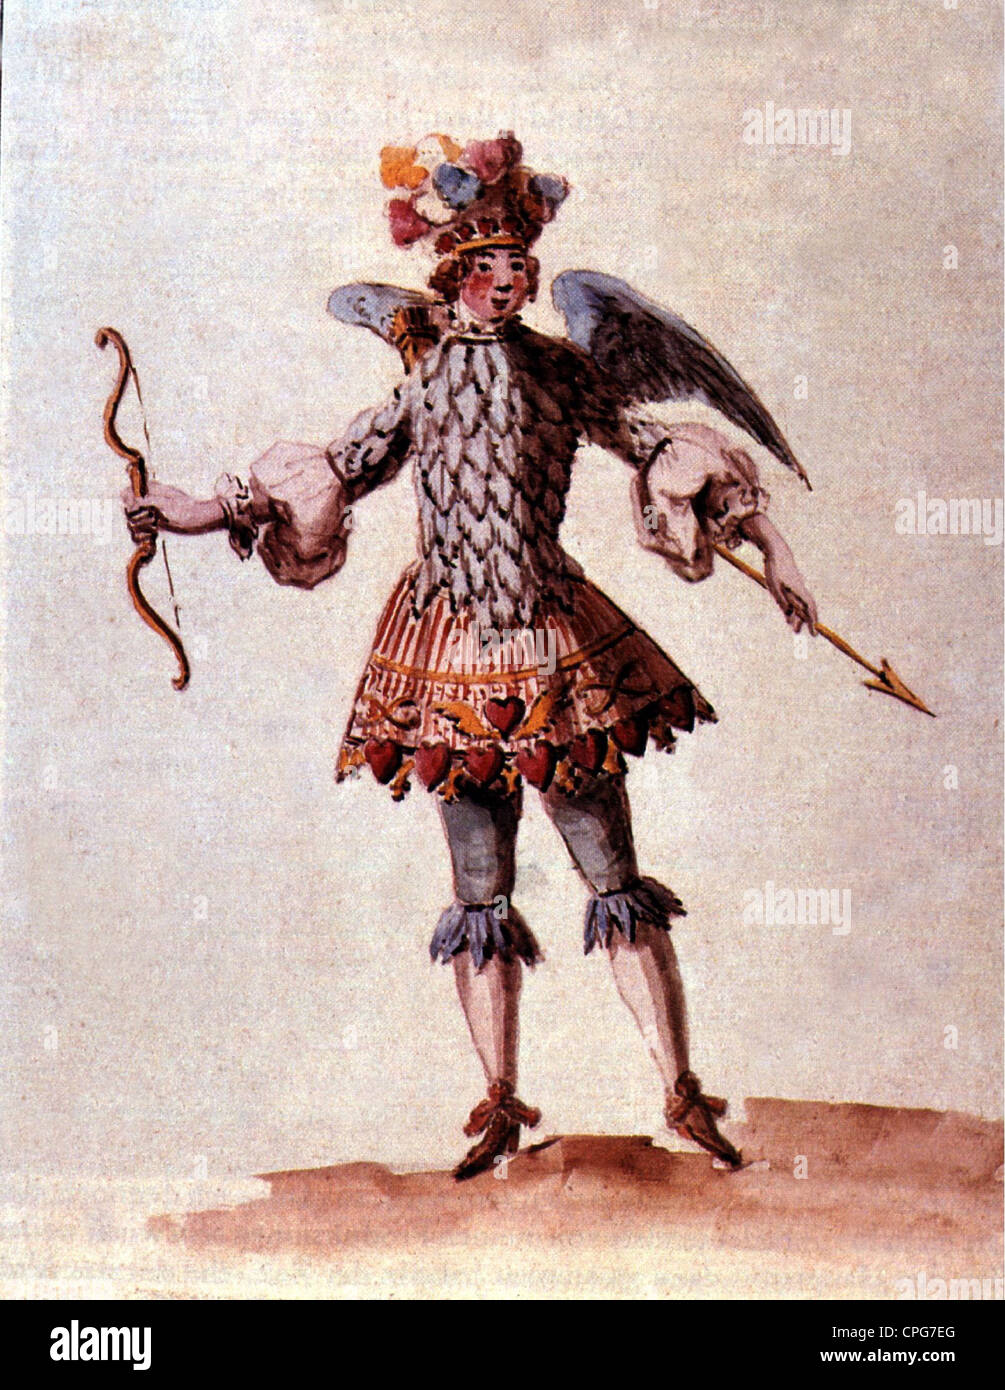 theatre / theater, characters, Cupid, contemporary figurine, circa 18th century, historic, historical, bow and arrow, hat, hats, wing, wings, winged, character, figure, figures, theatric part, stage role, role, character, theatrical role, part, persona, roles, characters, theatrical roles, parts, personae, reverse roles, read a play with assigned parts, full length, messenger of love, messengers of love, people, Additional-Rights-Clearences-Not Available Stock Photo